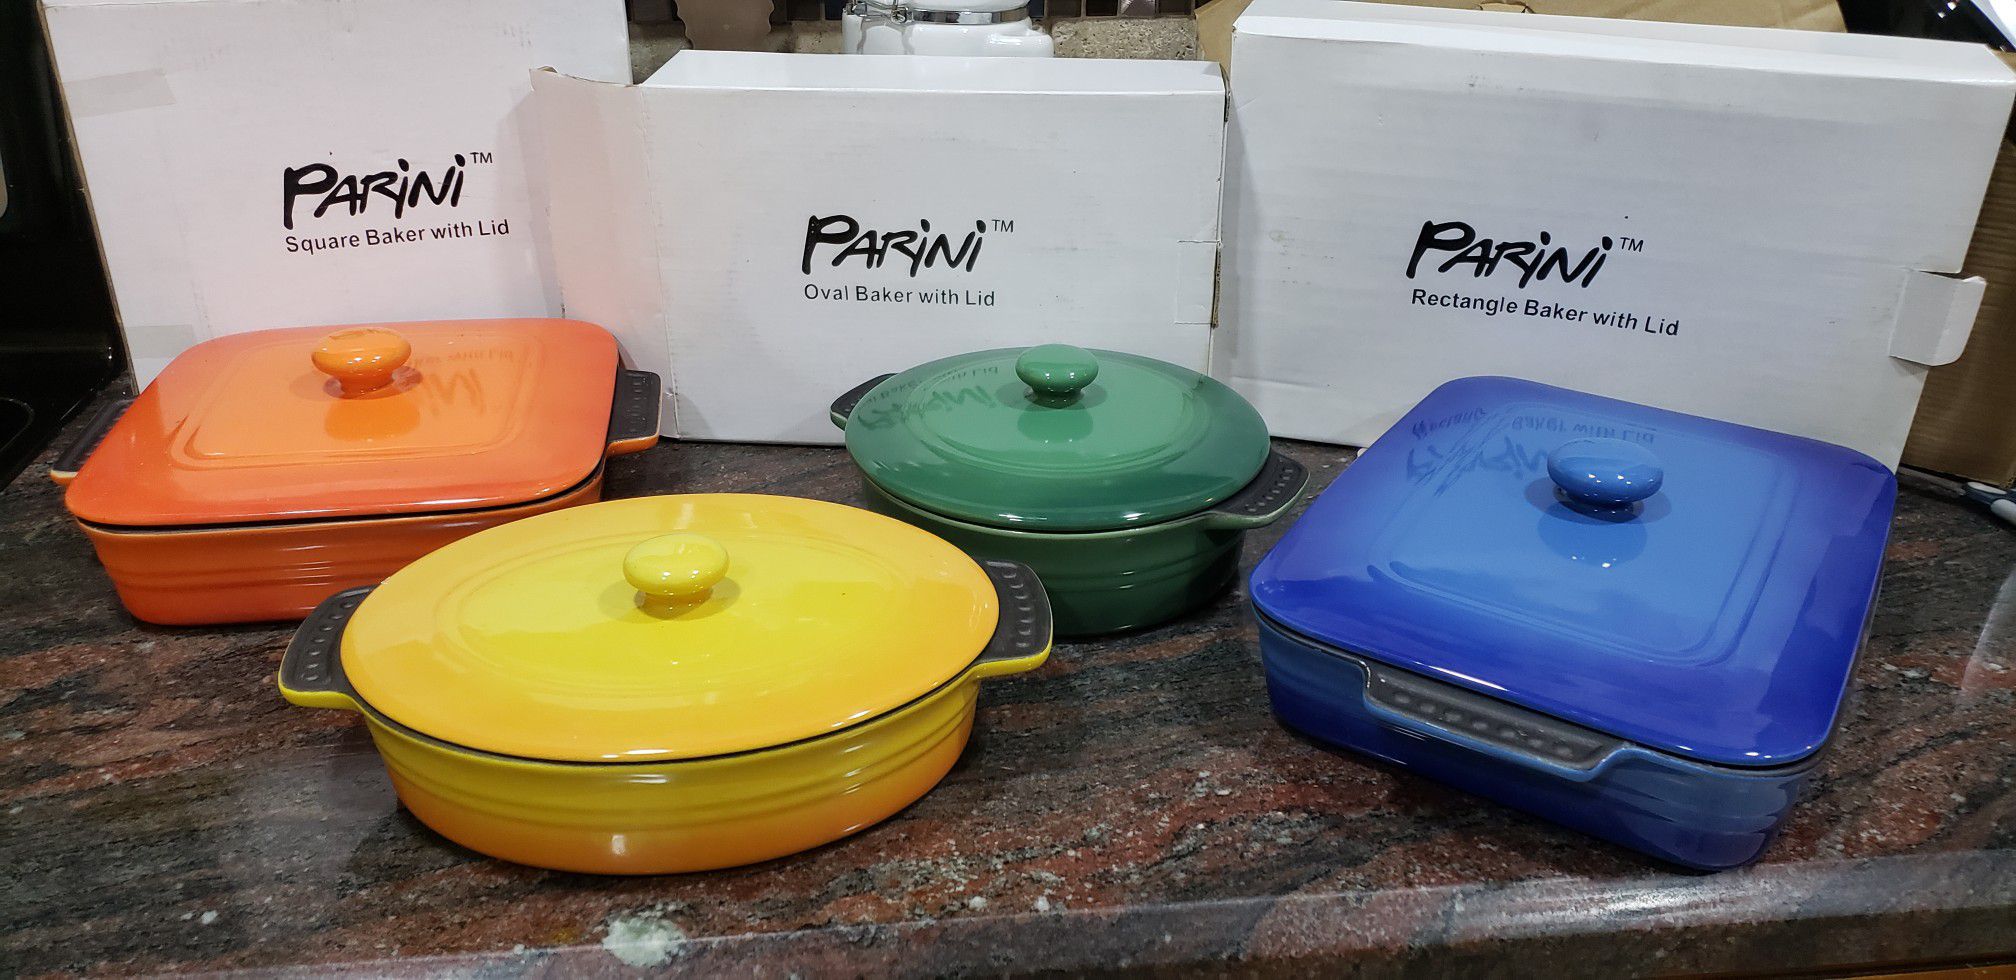 Parini casserole bakeware Perfect for cooking all those Thanksgiving side dishes.